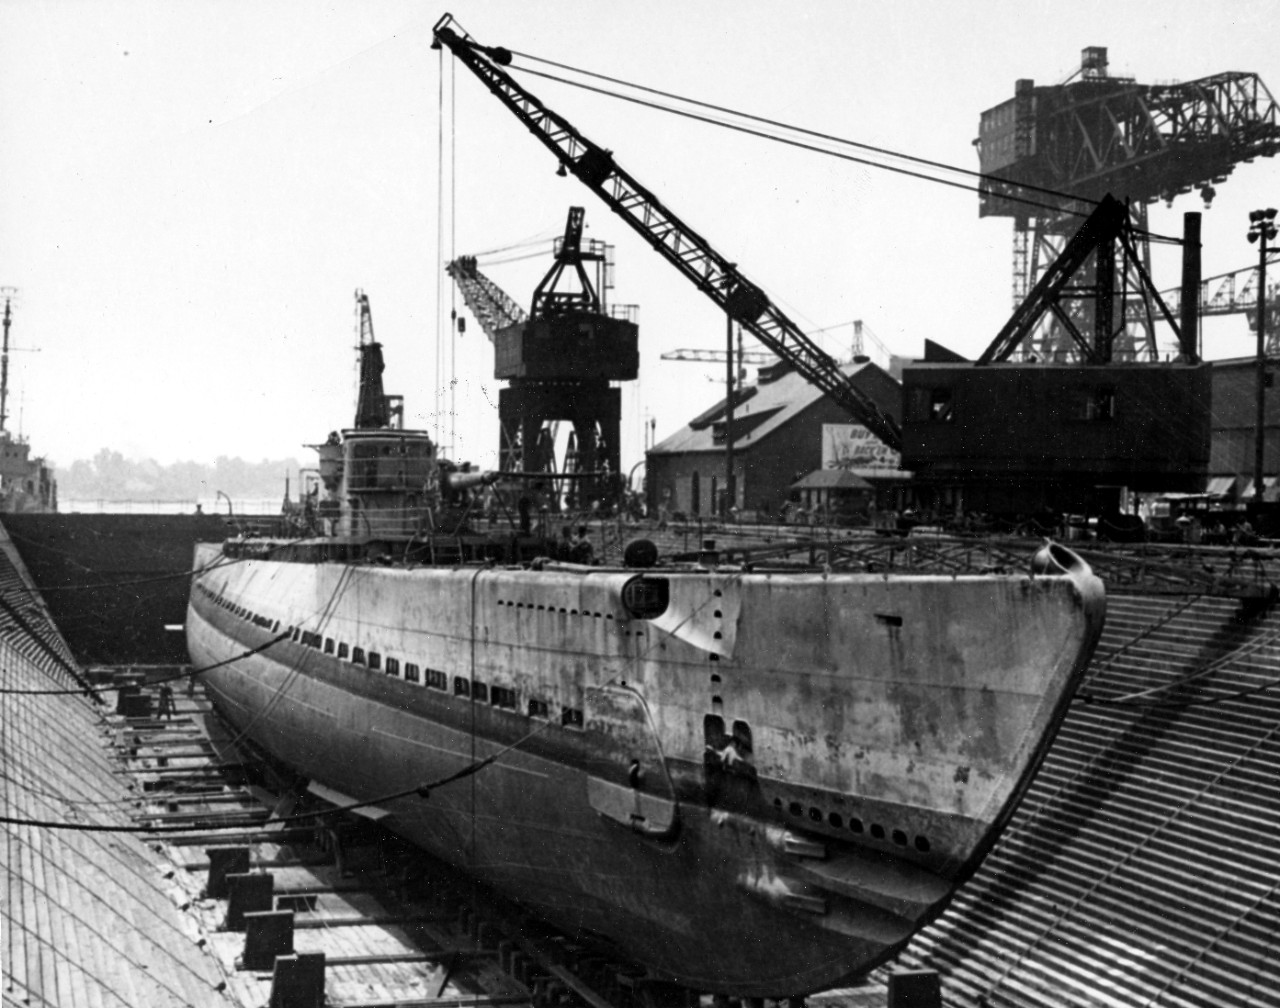 Ex-Nautilus on keel blocks drydocked at the Philadelphia Naval Shipyard, Pa., on 26 January 1946. (U.S. Navy Photograph 80-G-701715, National Archives and Records Administration, Still Pictures Division, College Park, Md.)